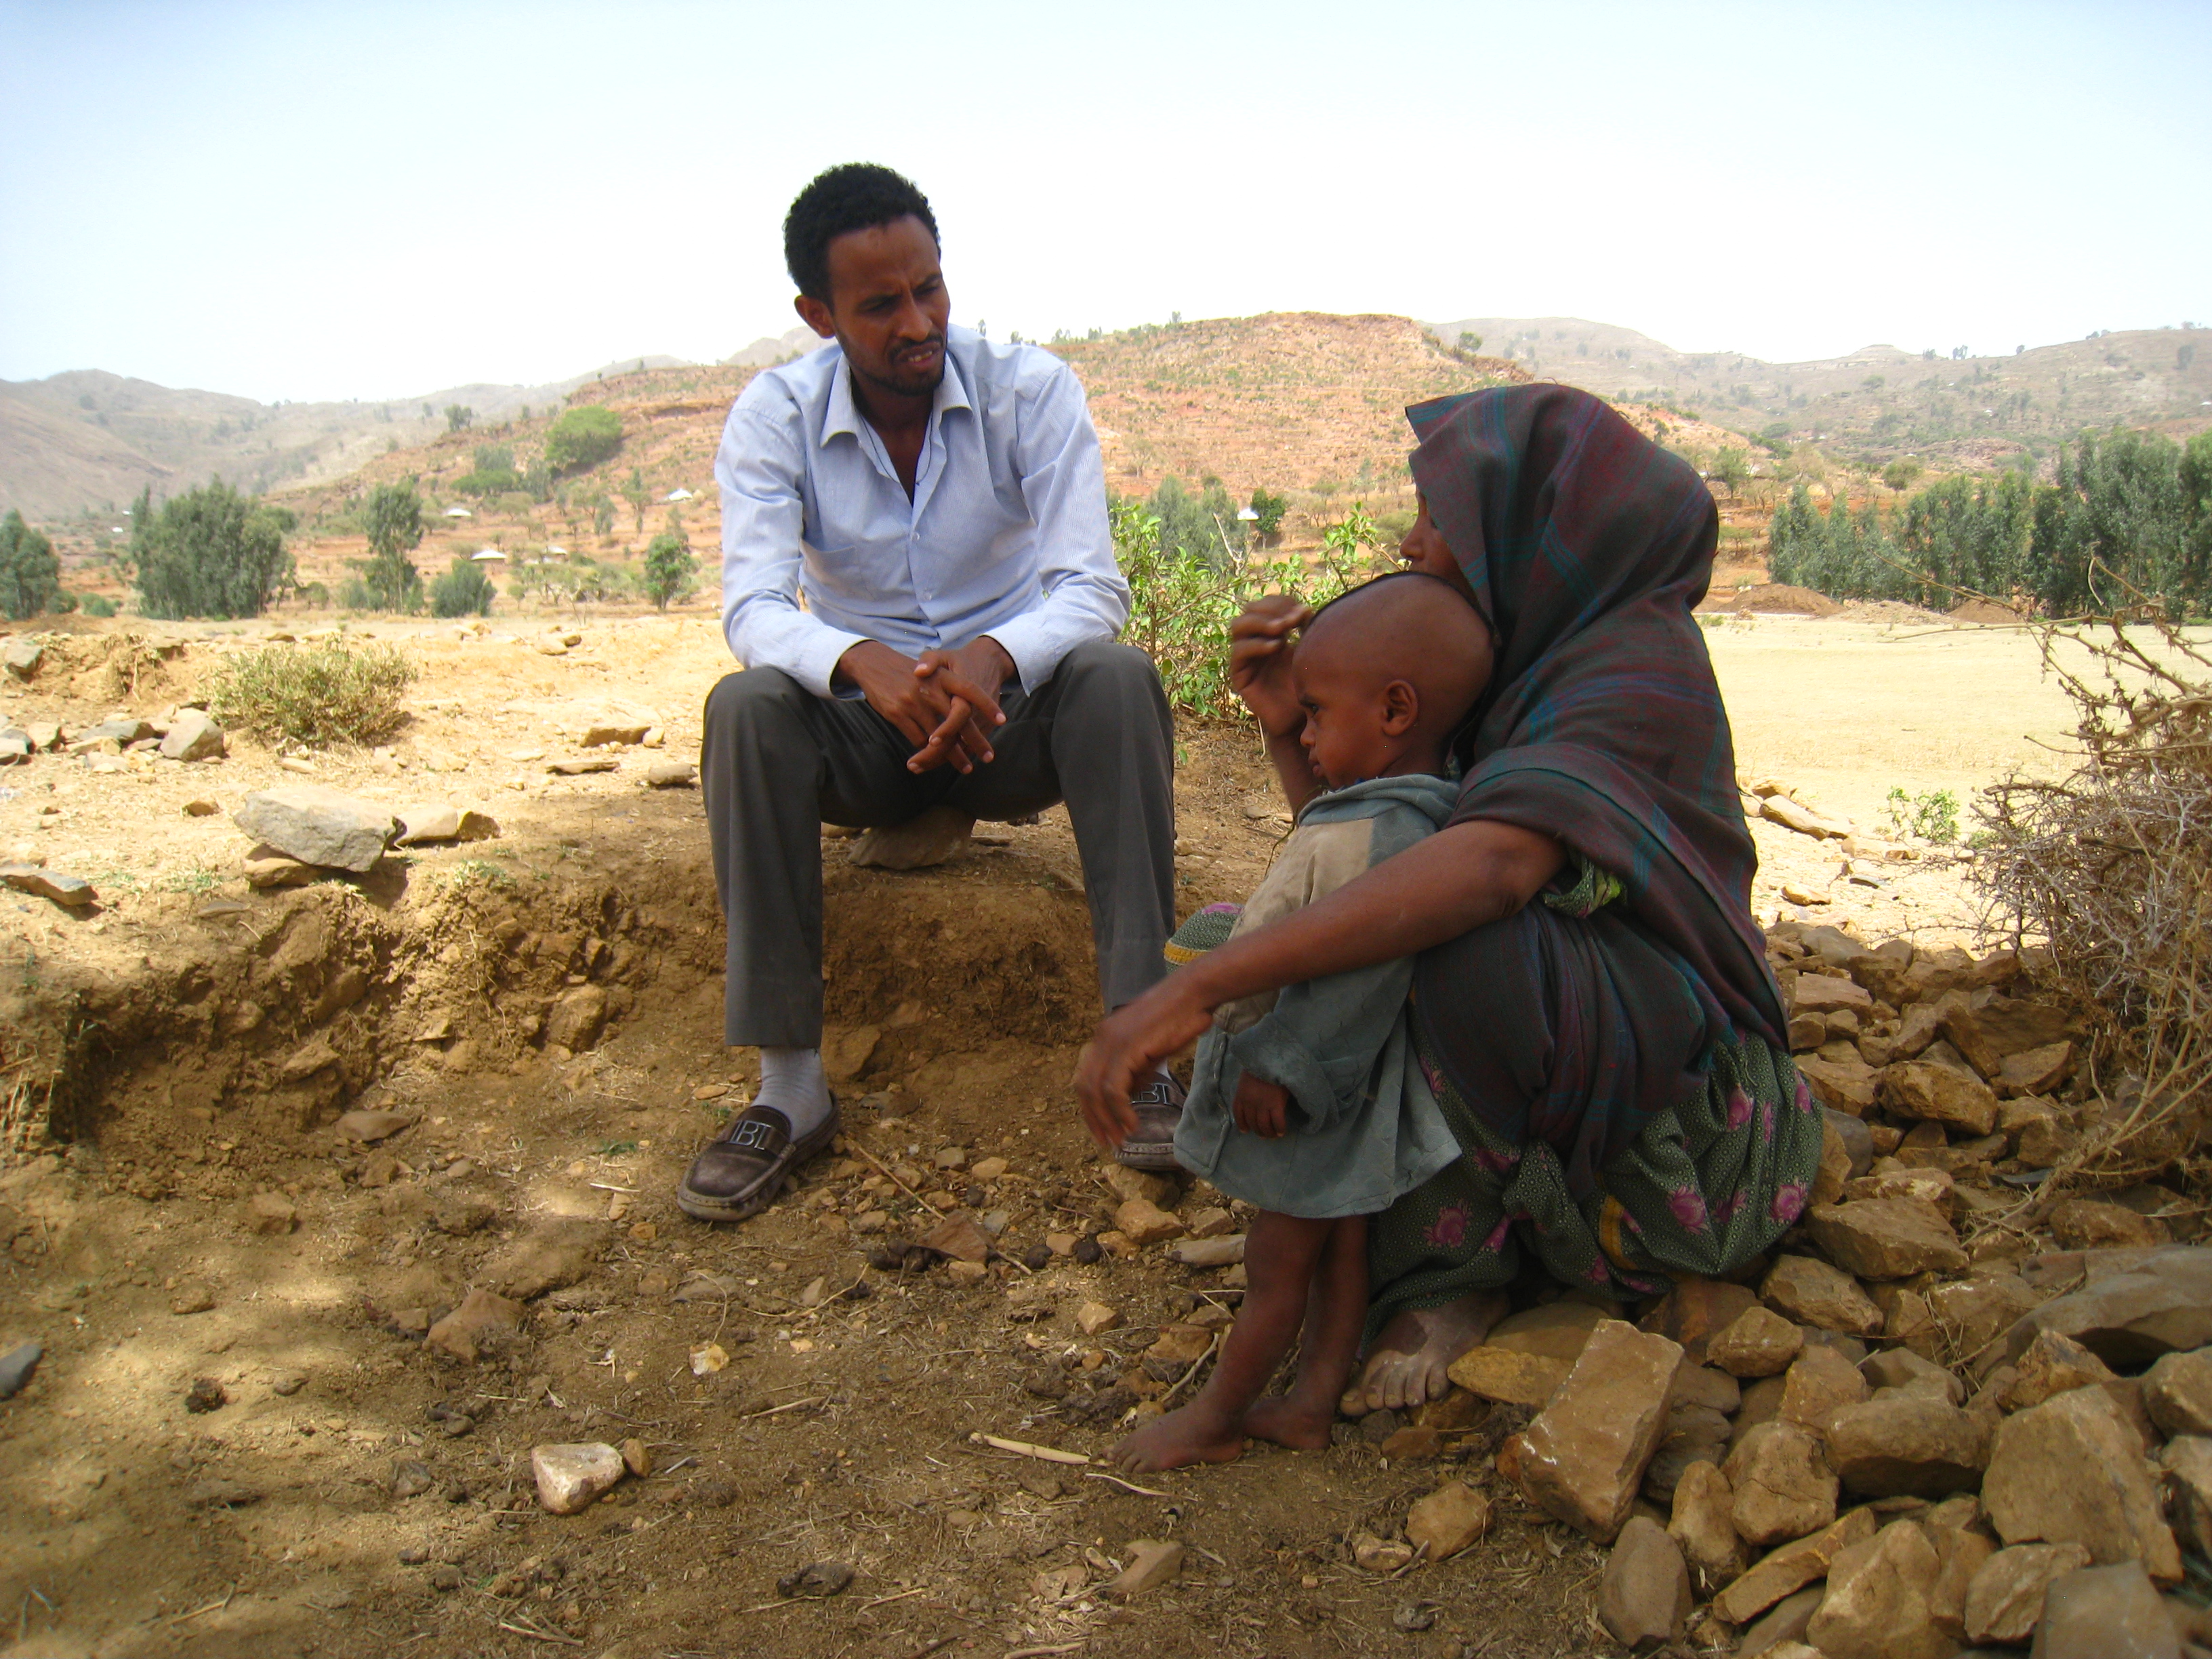 A mother being interviewed in Ethiopia